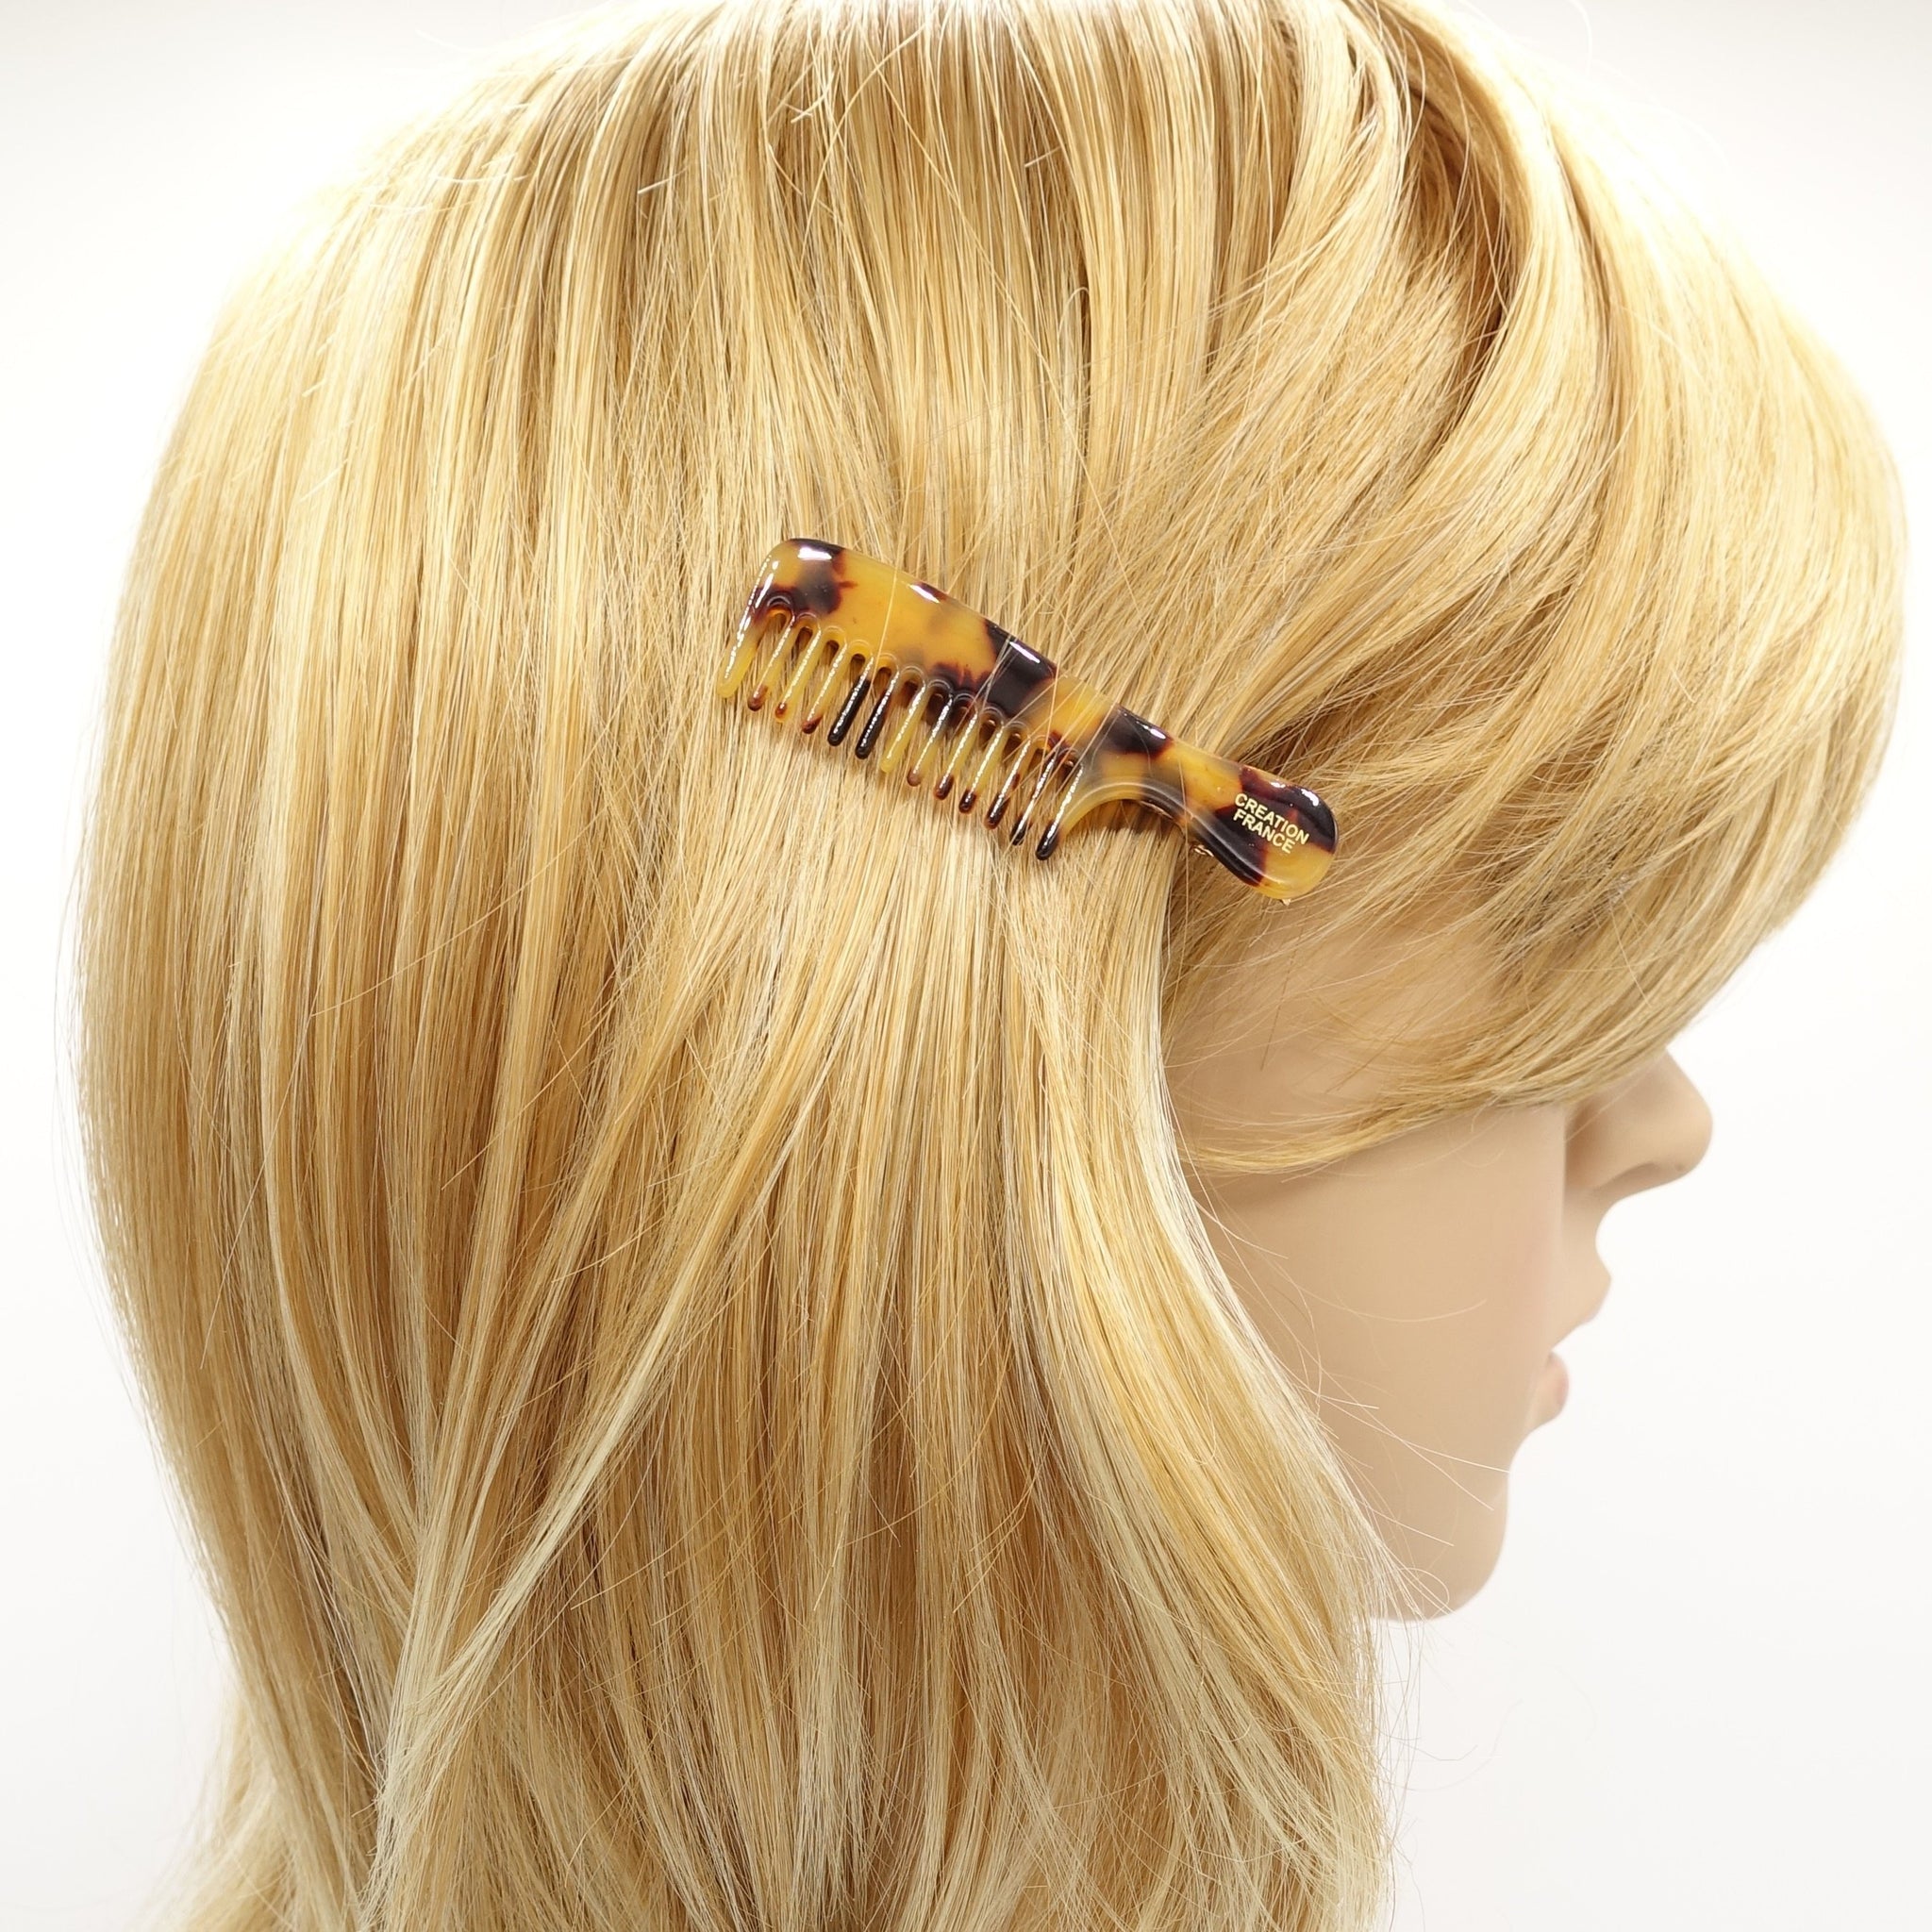 VeryShine cellulose acetate comb hair clip hair accessory for women